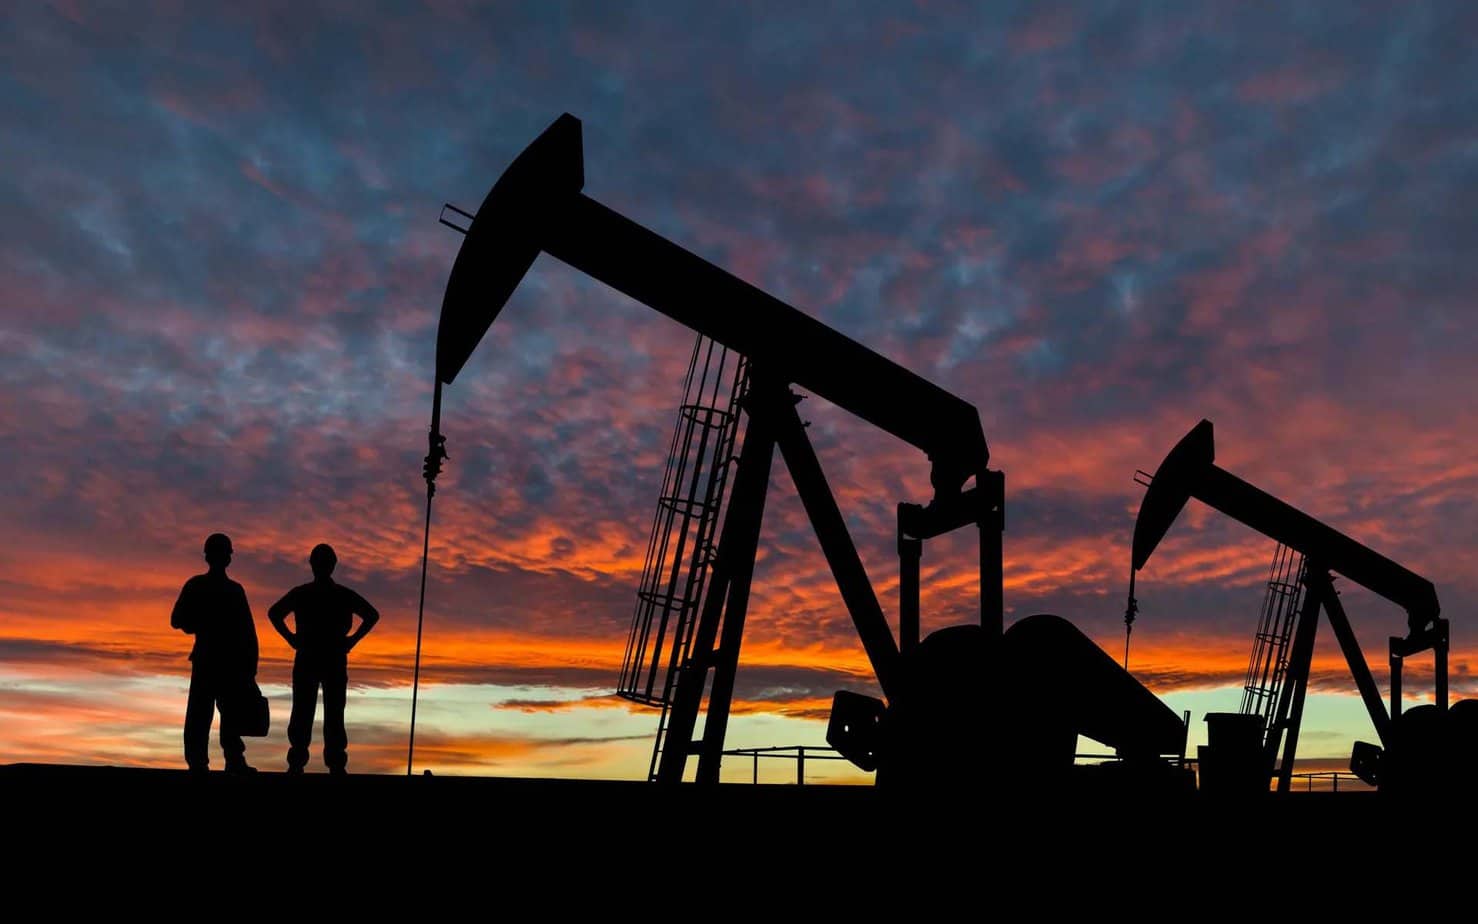 OIL PRICES ARE A BIGGER CONCERN THAN COVID - Experts on the oil industry have worries